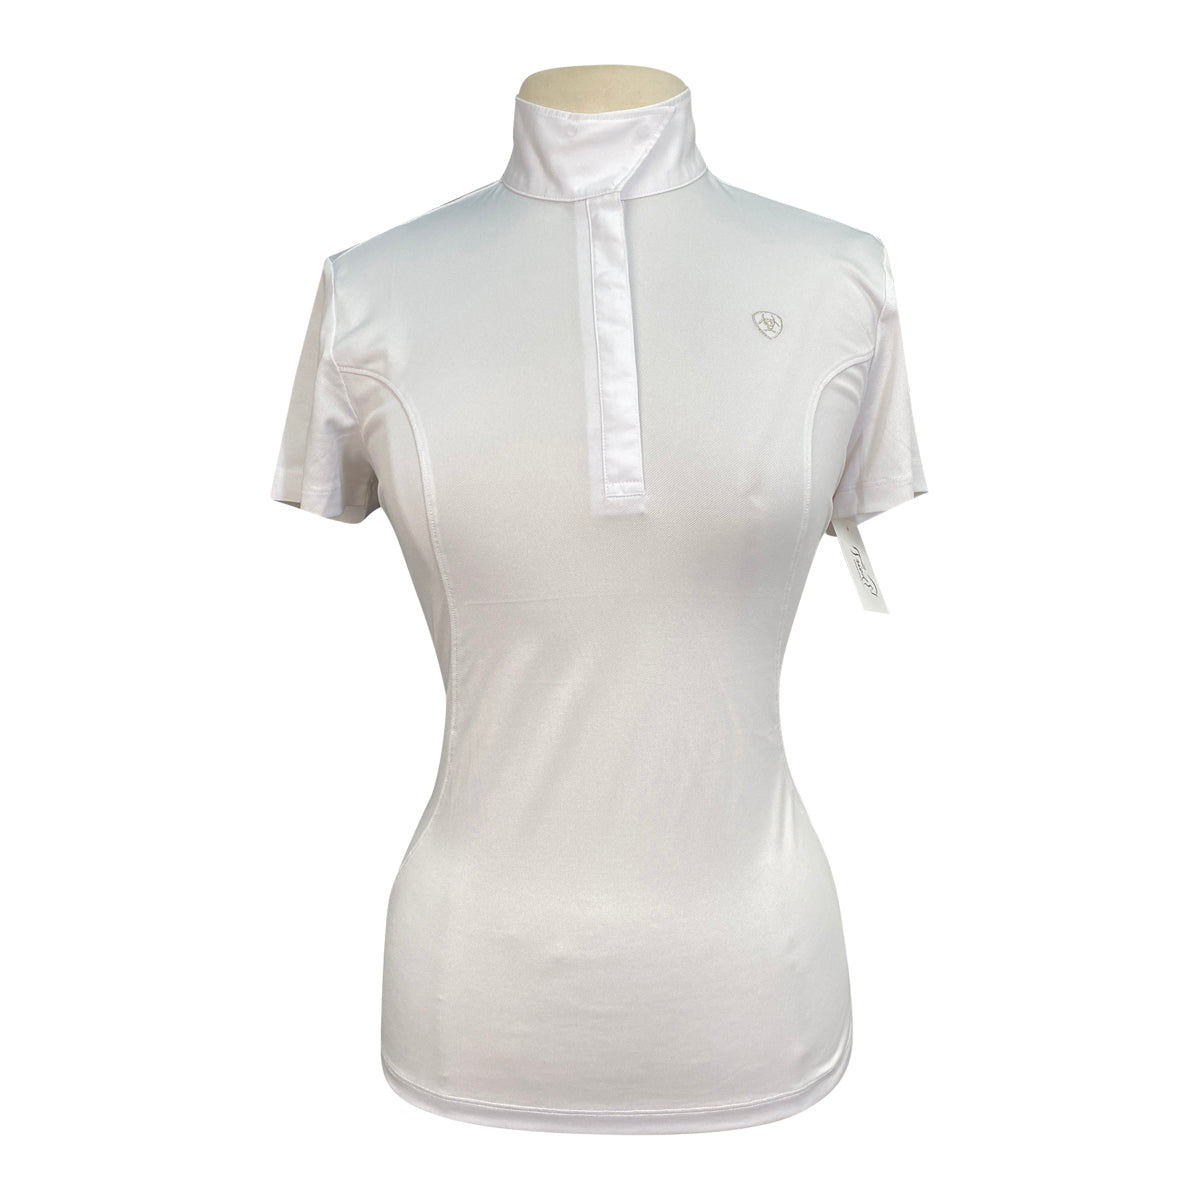 Ariat Pro Series Competition Top in White